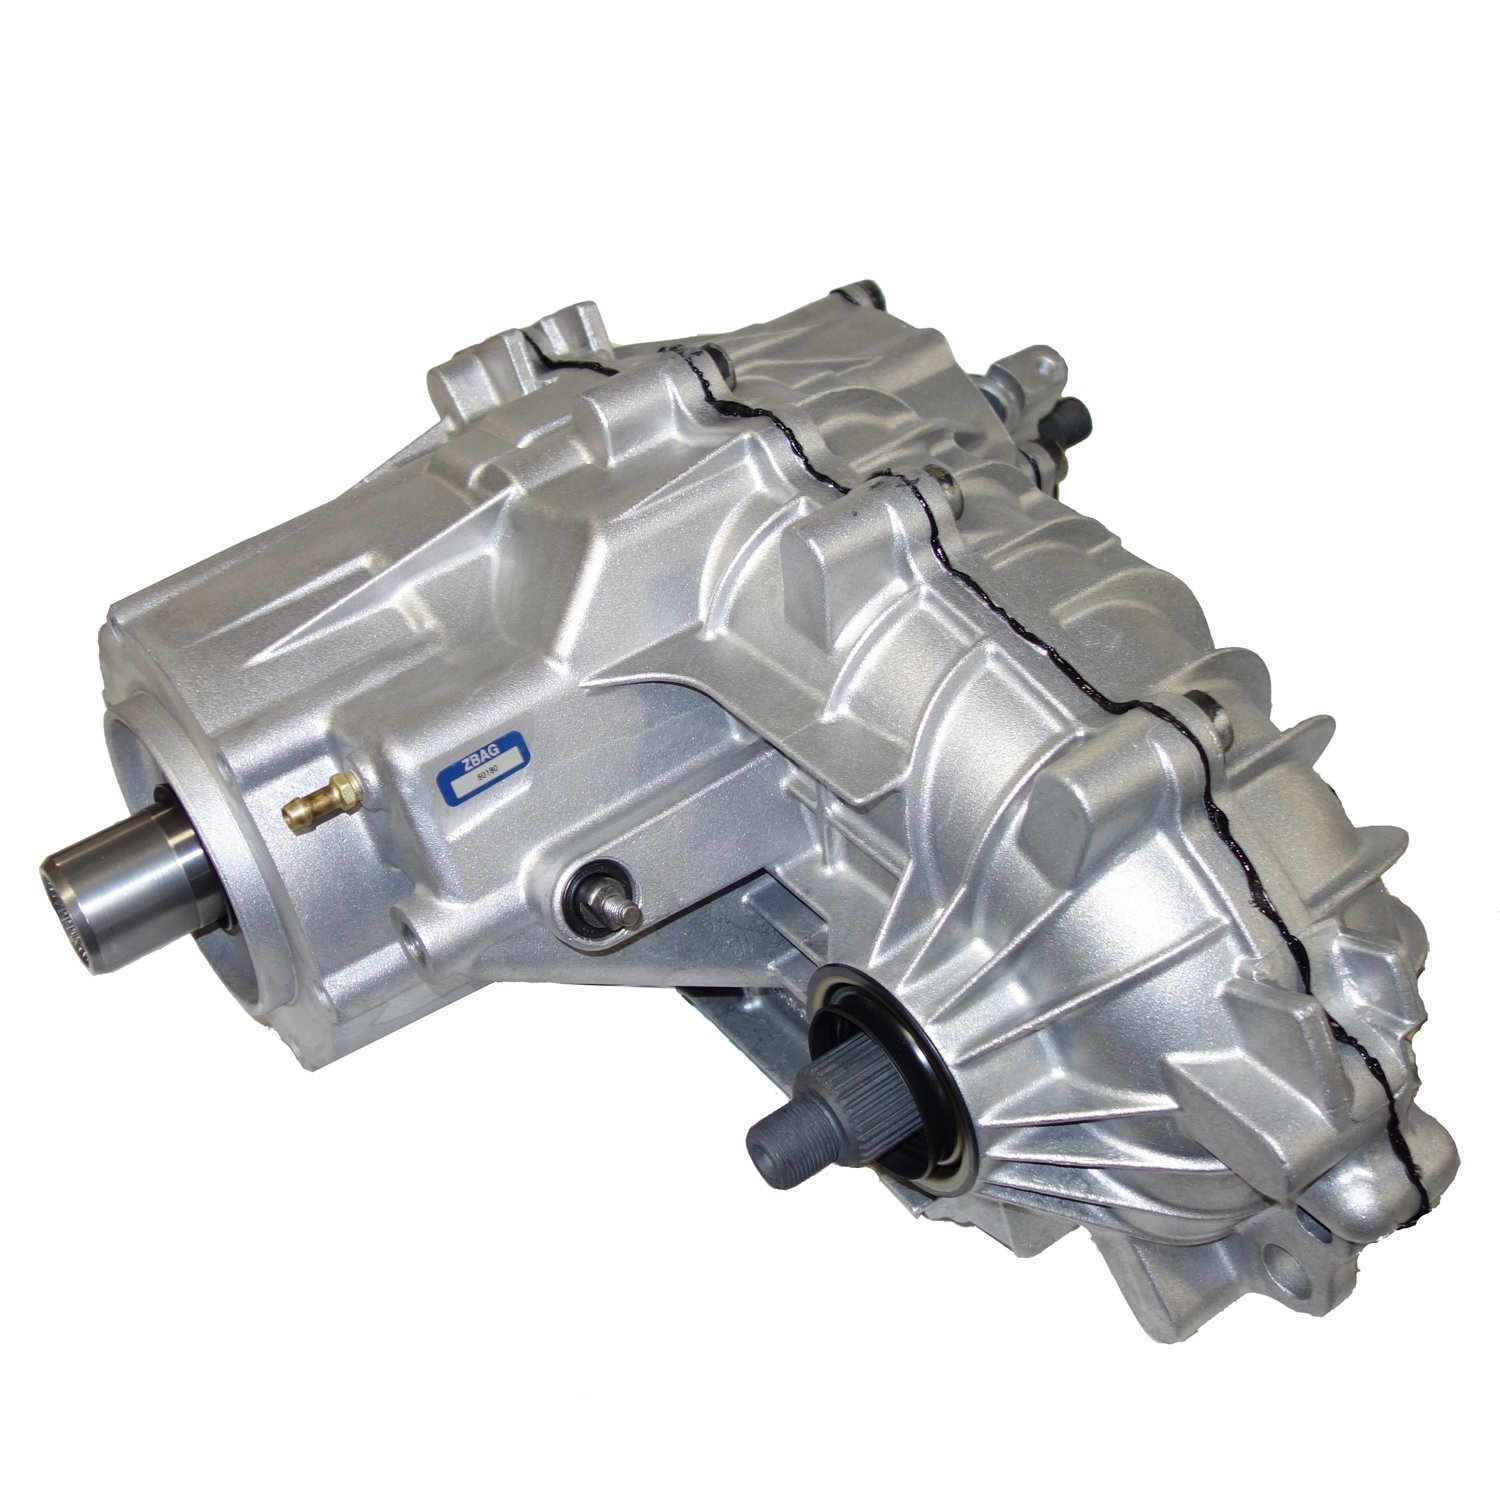 Remanufactured BW1370 & BW4401 Transfer Case for GM 84-00 F3500